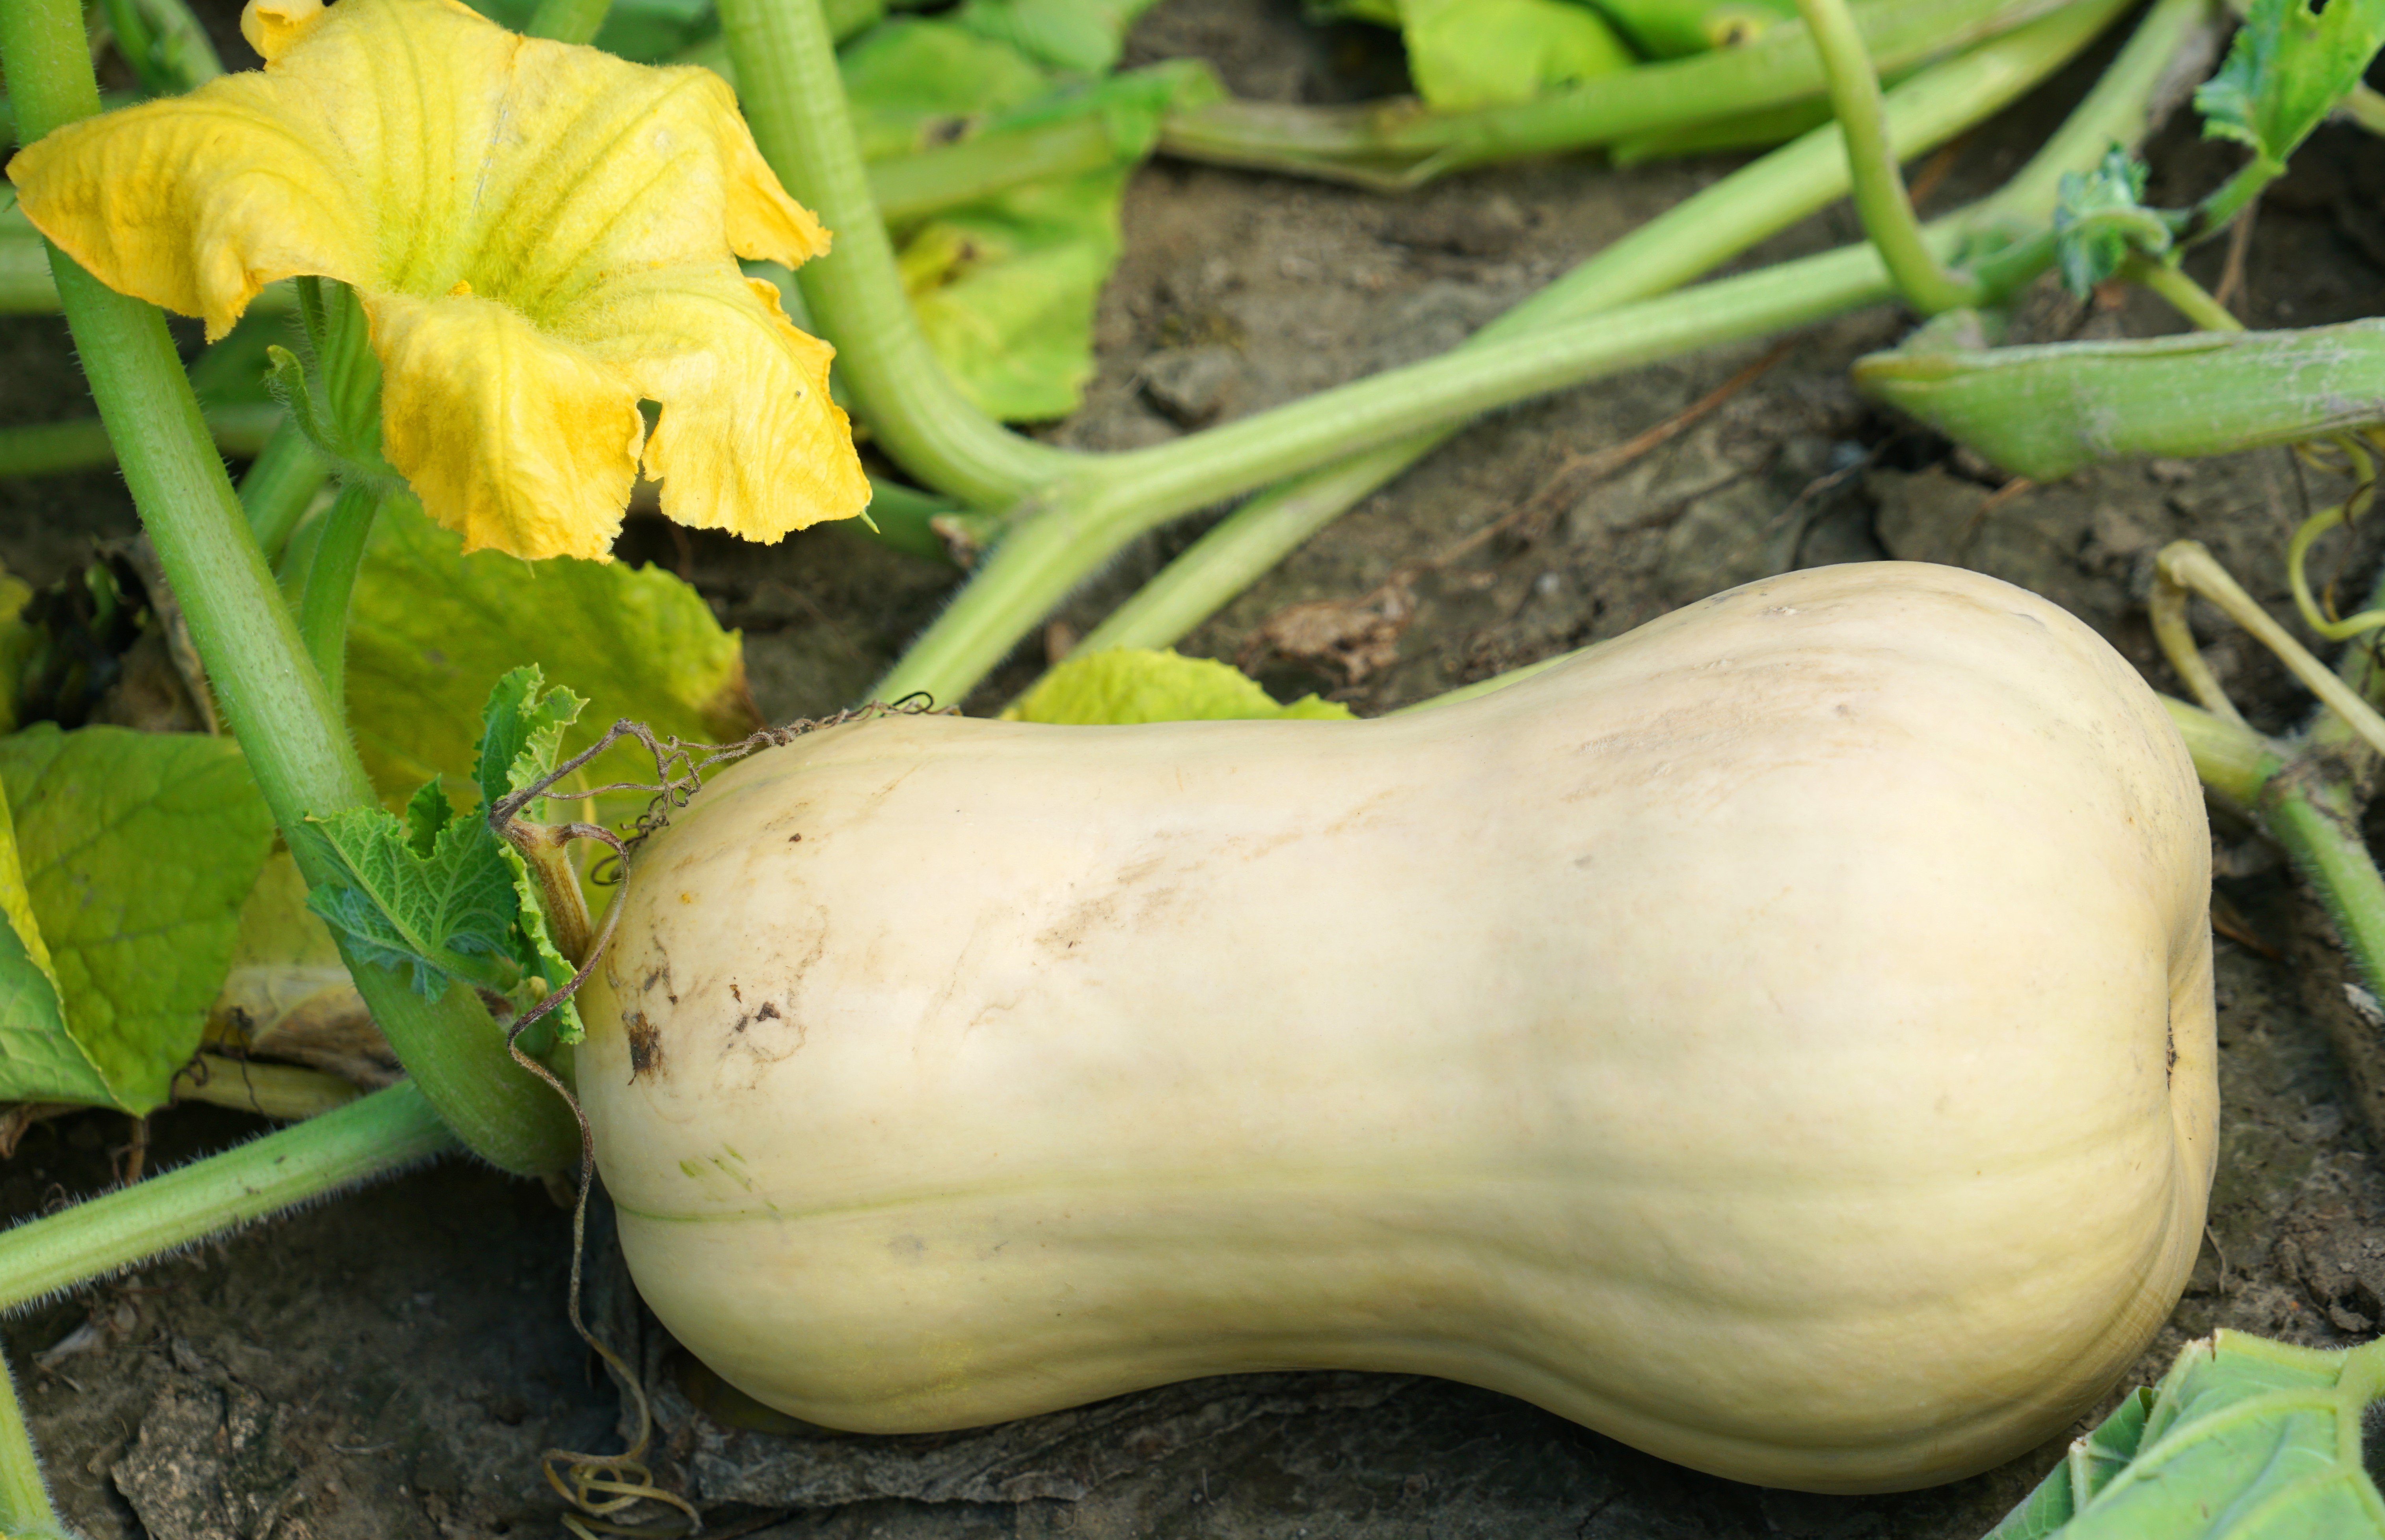  Types of butternut squash to grow